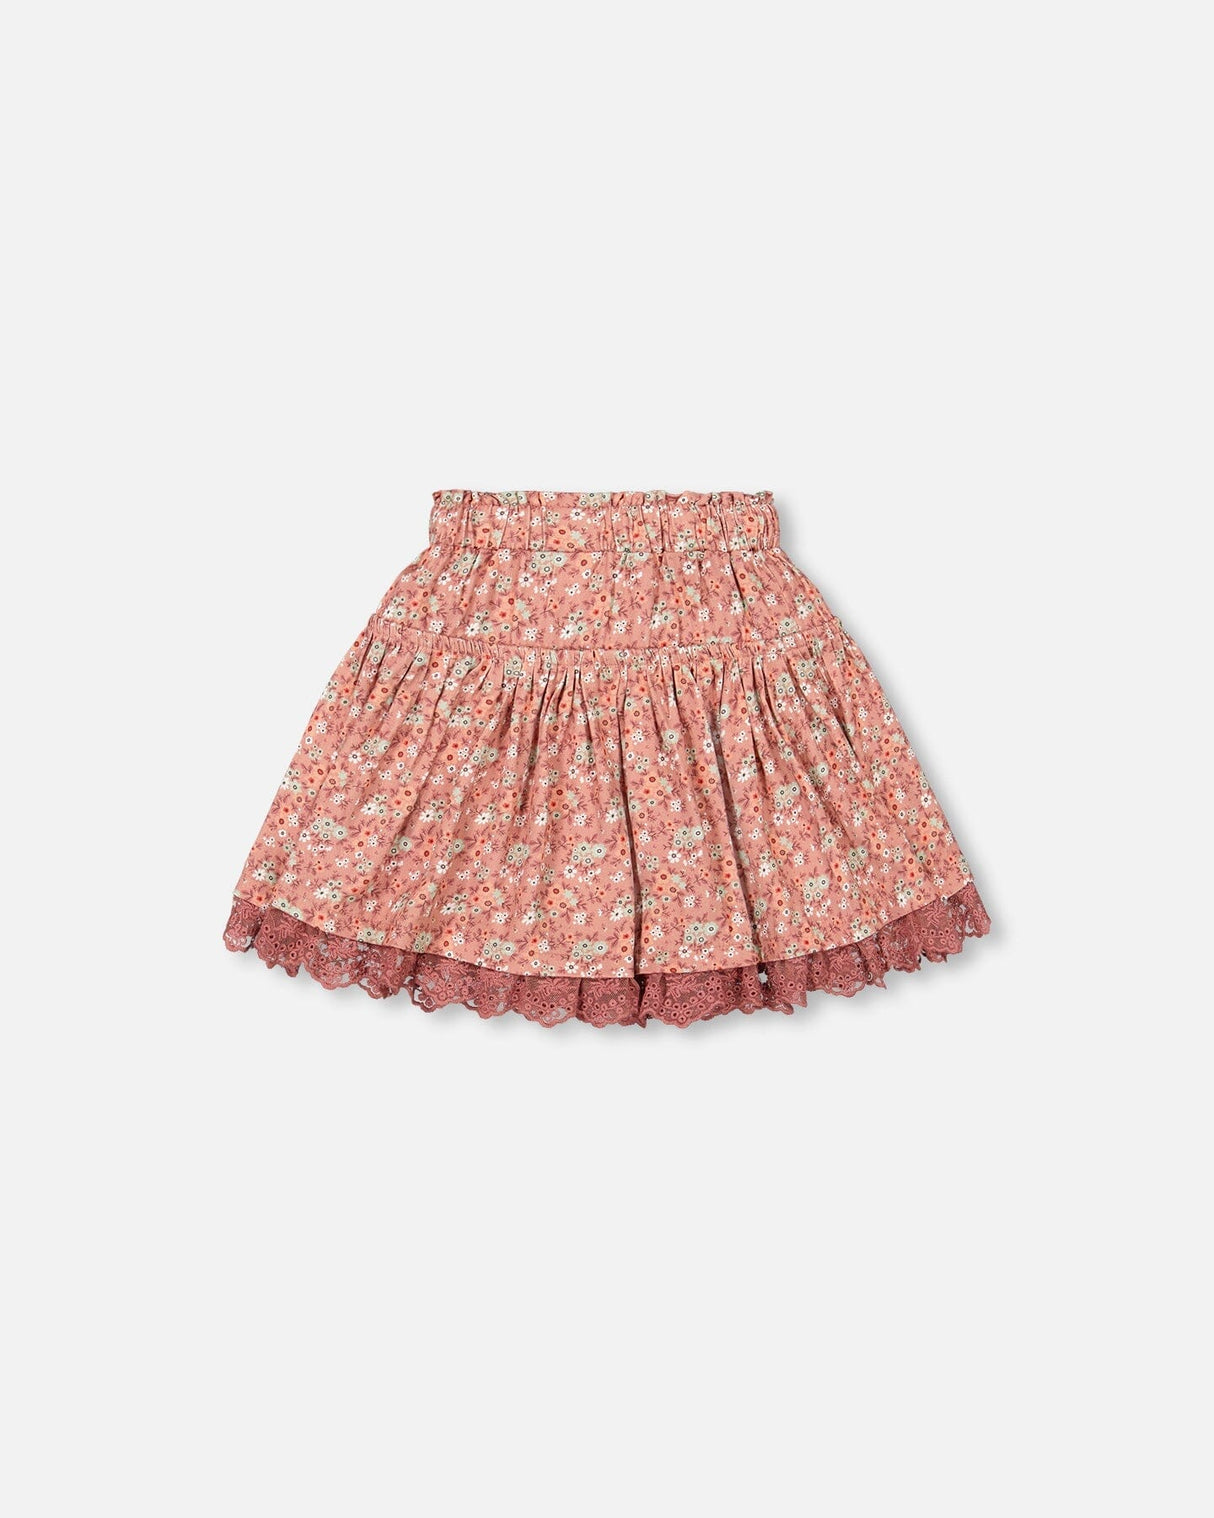 Printed Woven Skirt Dusty Mauve Floral Print-3